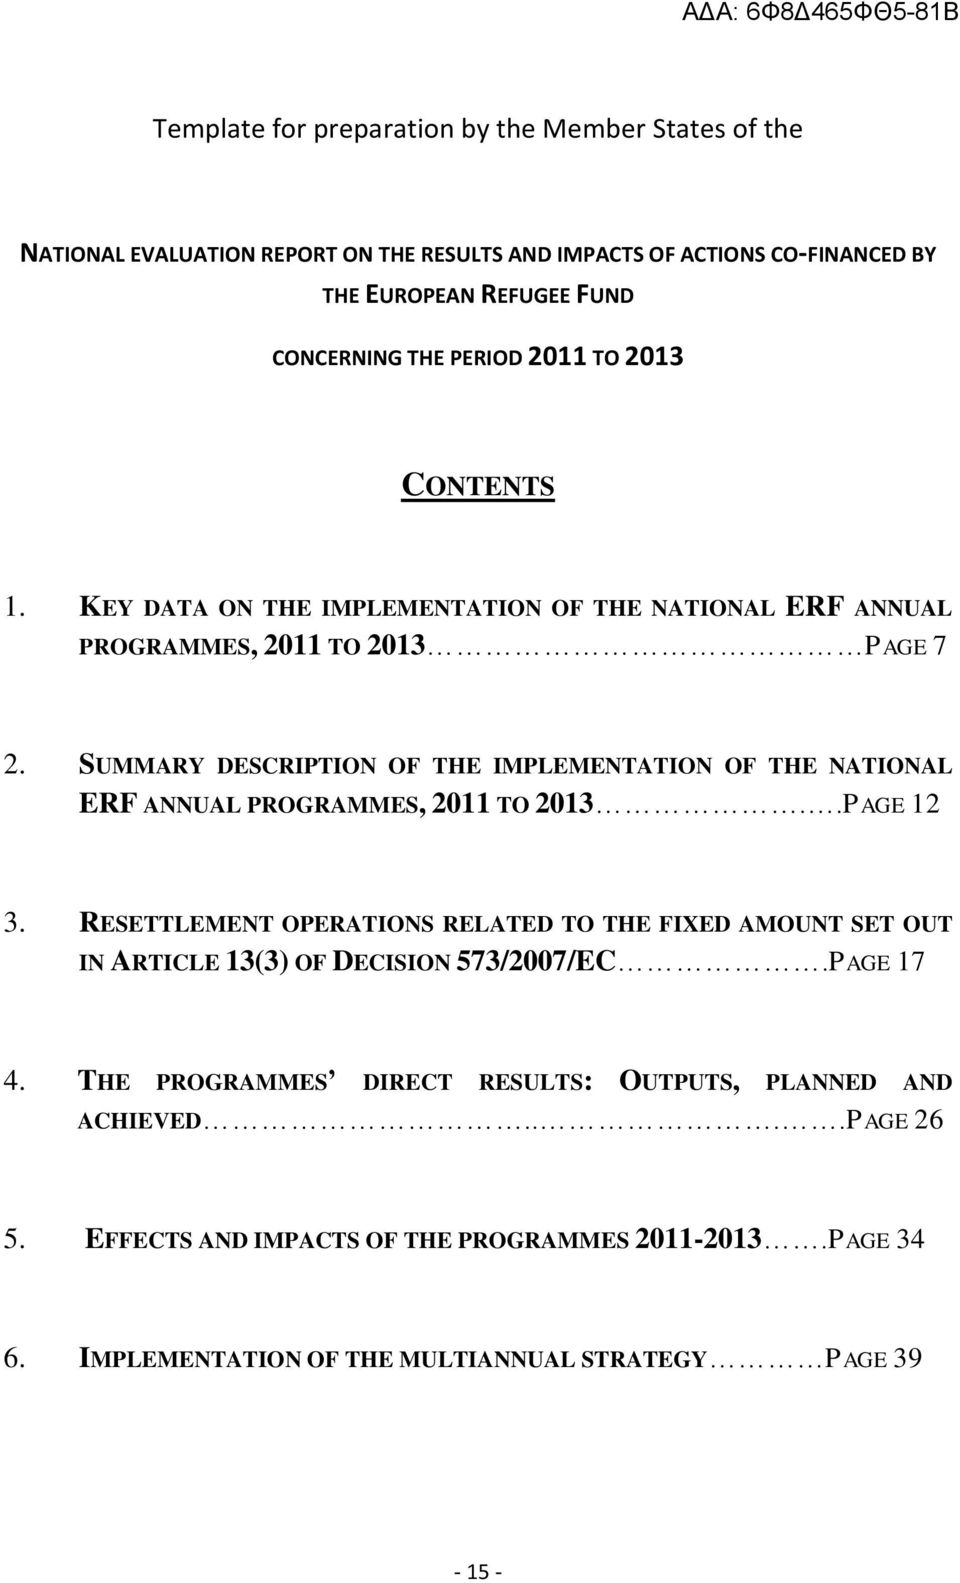 SUMMARY DESCRIPTION OF THE IMPLEMENTATION OF THE NATIONAL ERF ANNUAL PROGRAMMES, 2011 TO 2013..PAGE 12 3.